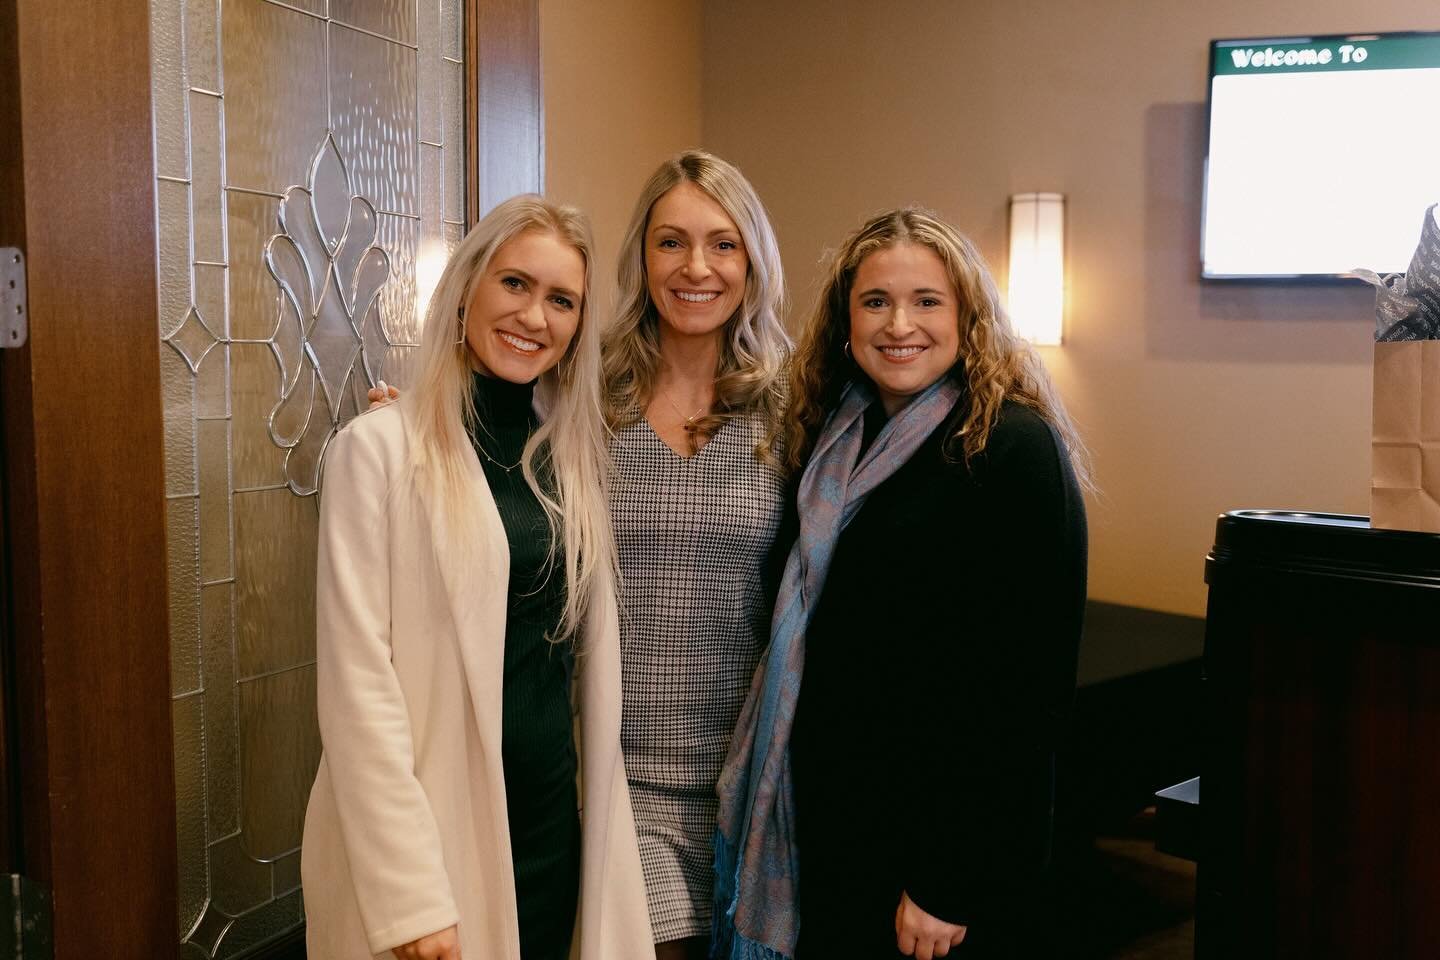 Speaking of partnerships, I&rsquo;m still in awe over how fun it was to host Luxury Travel &amp; Wine Night with @alanna_amawaterways + @isabellaborowiec.

We spent the night inspiring North Dakotans to dream bigger, write down their goals, and see t